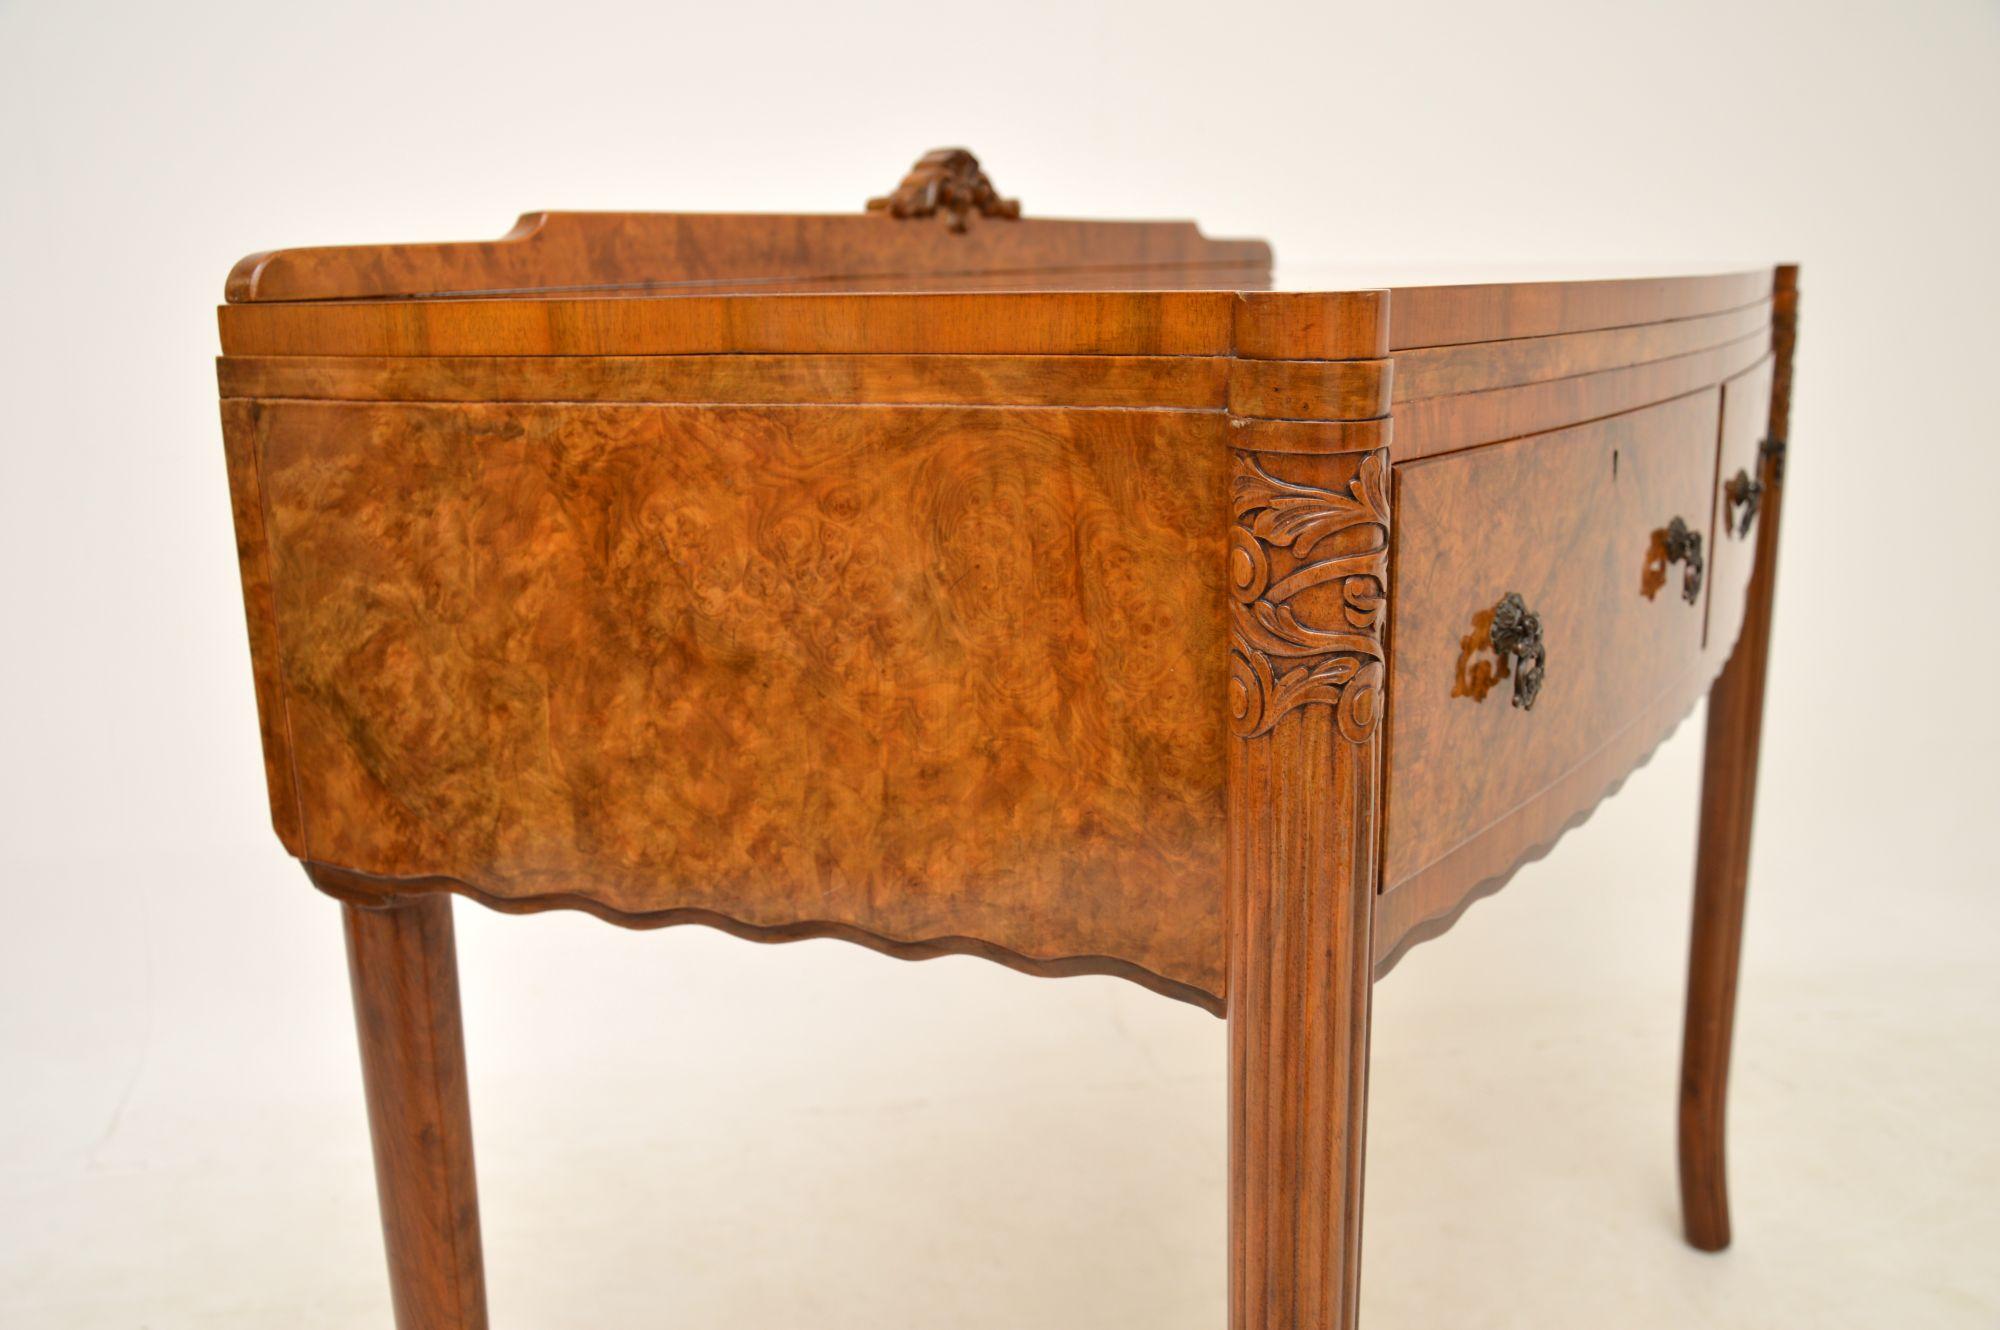 Early 20th Century Antique Burr Walnut Console / Server Table